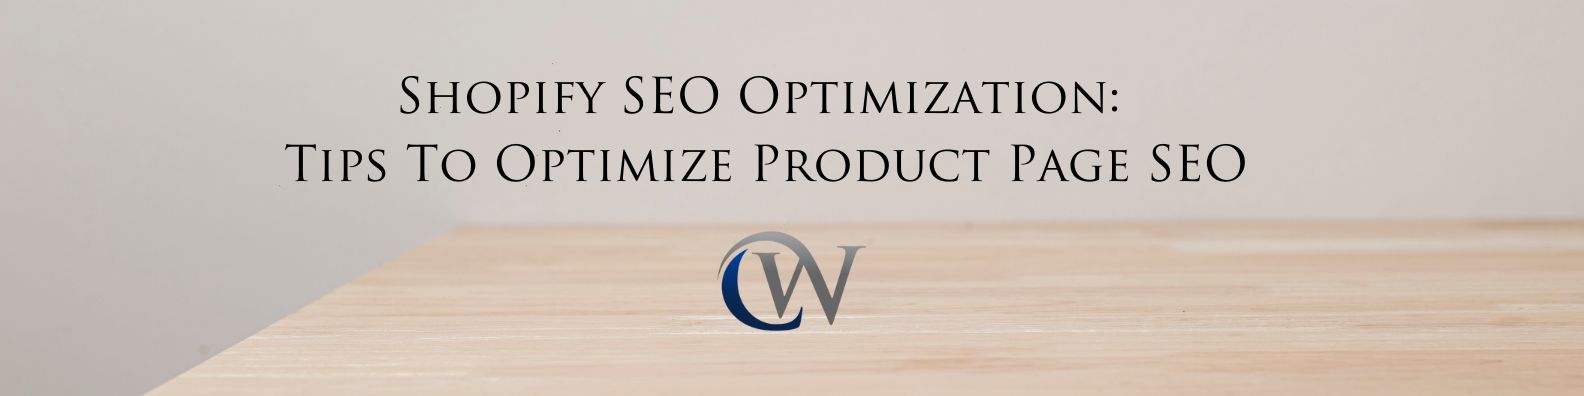 optimize your shopify SEO product pages with these SEO tips!